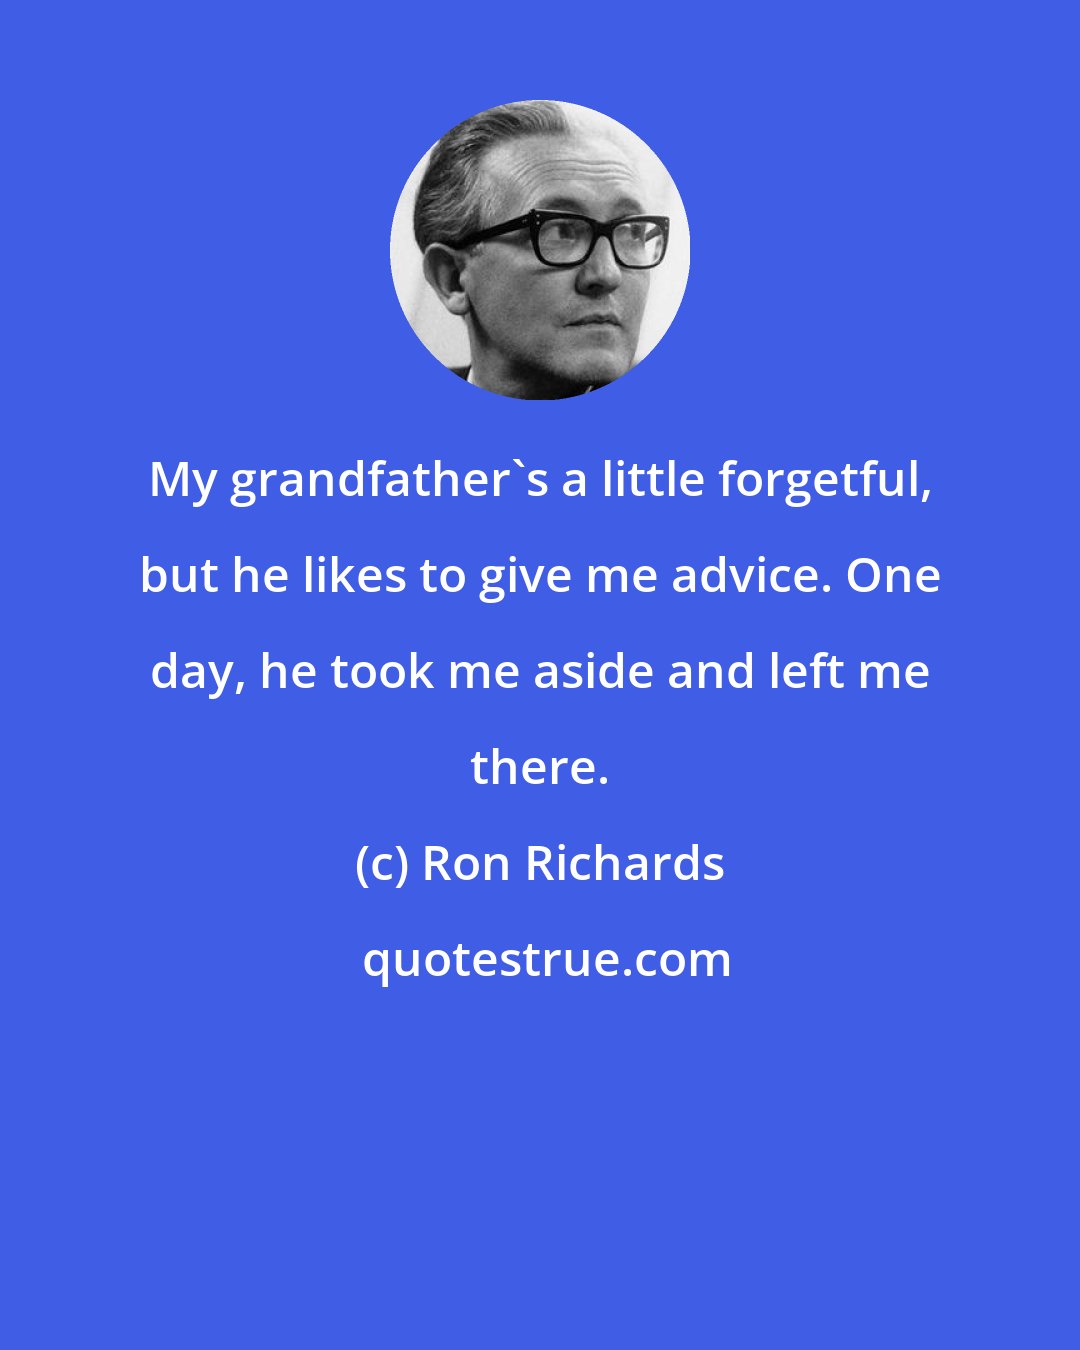 Ron Richards: My grandfather's a little forgetful, but he likes to give me advice. One day, he took me aside and left me there.